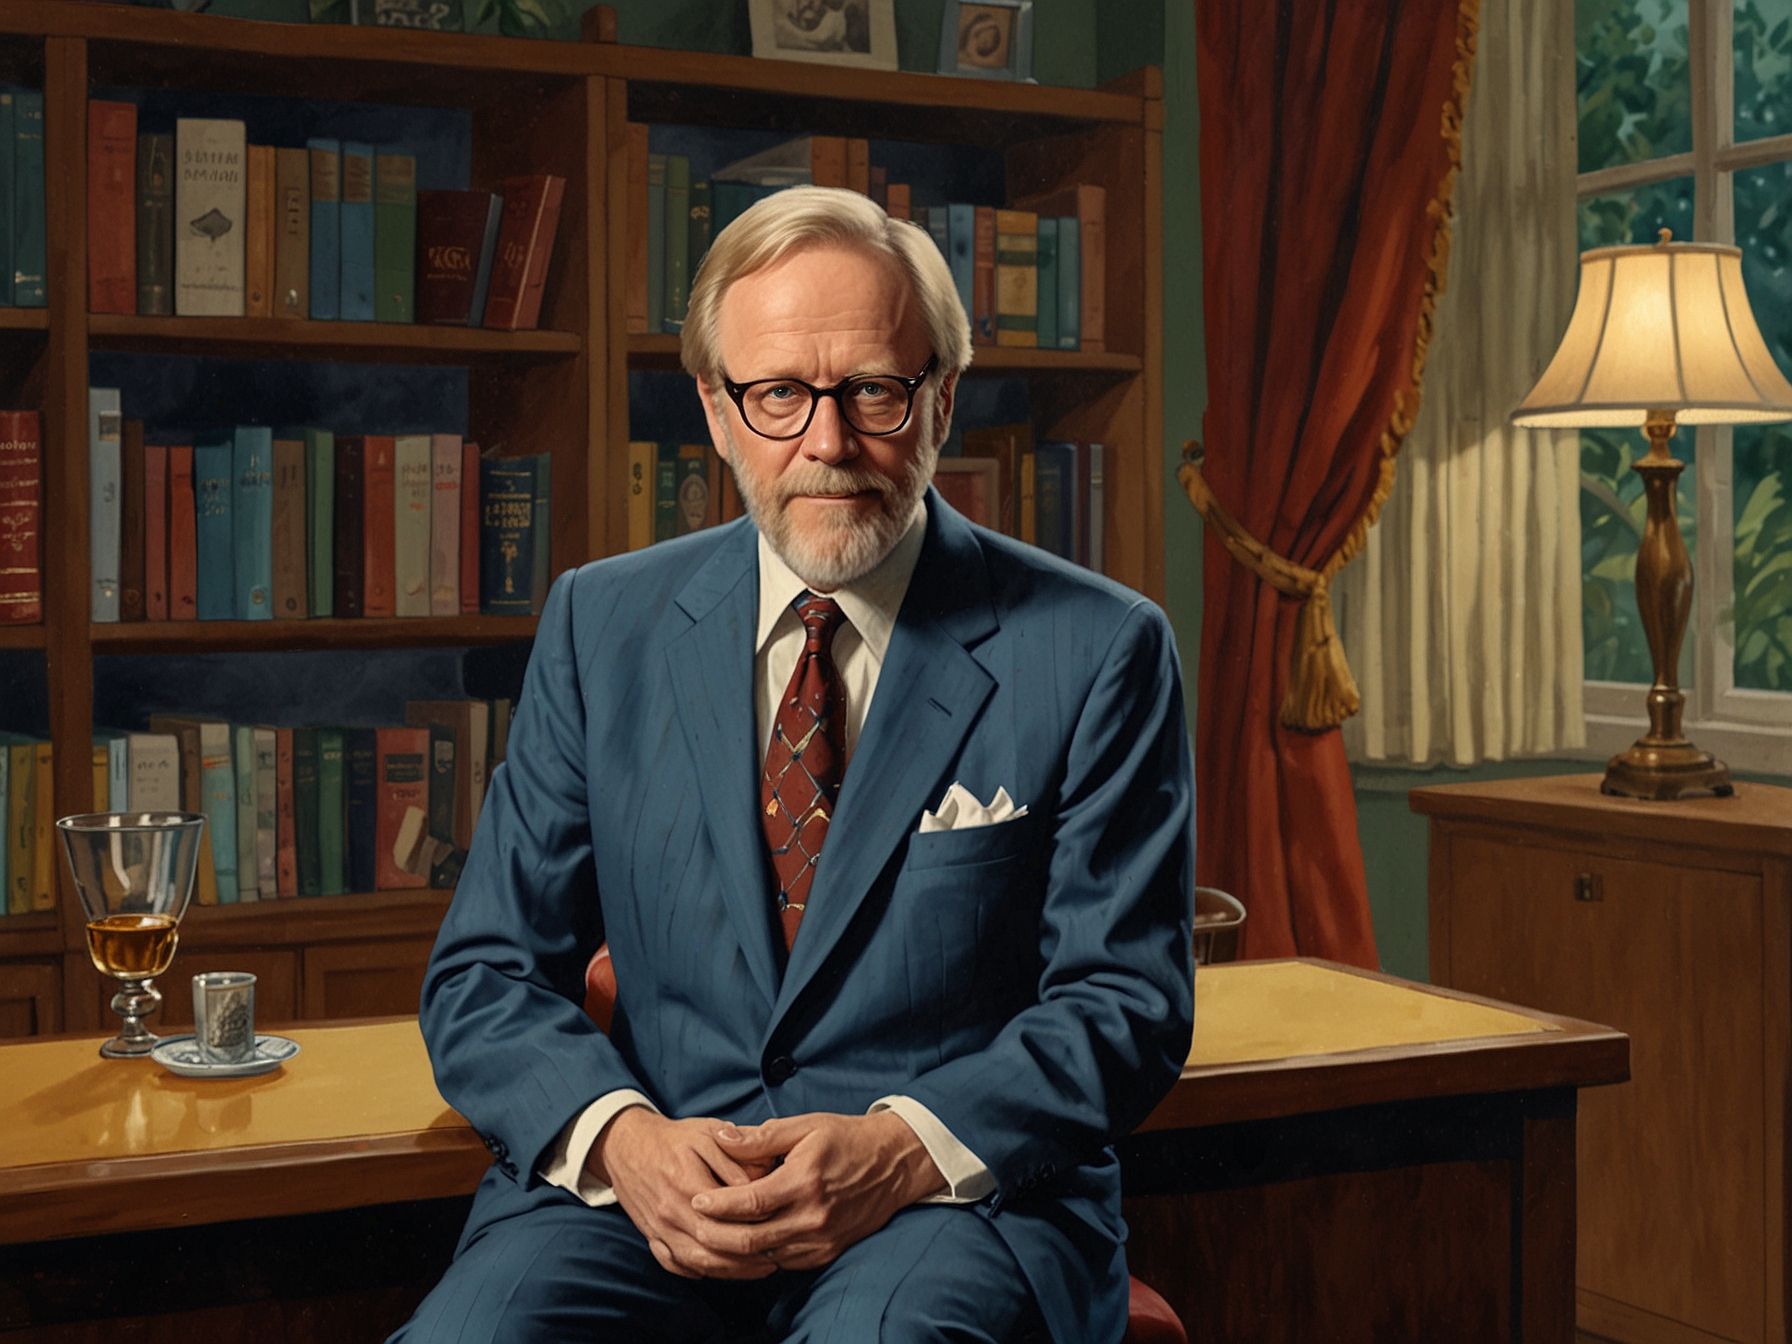 A scene from 'Fernwood 2 Night' featuring Martin Mull as Barth Gimble, showcasing his sharp wit and distinctive style in his role as the sardonic talk-show host.